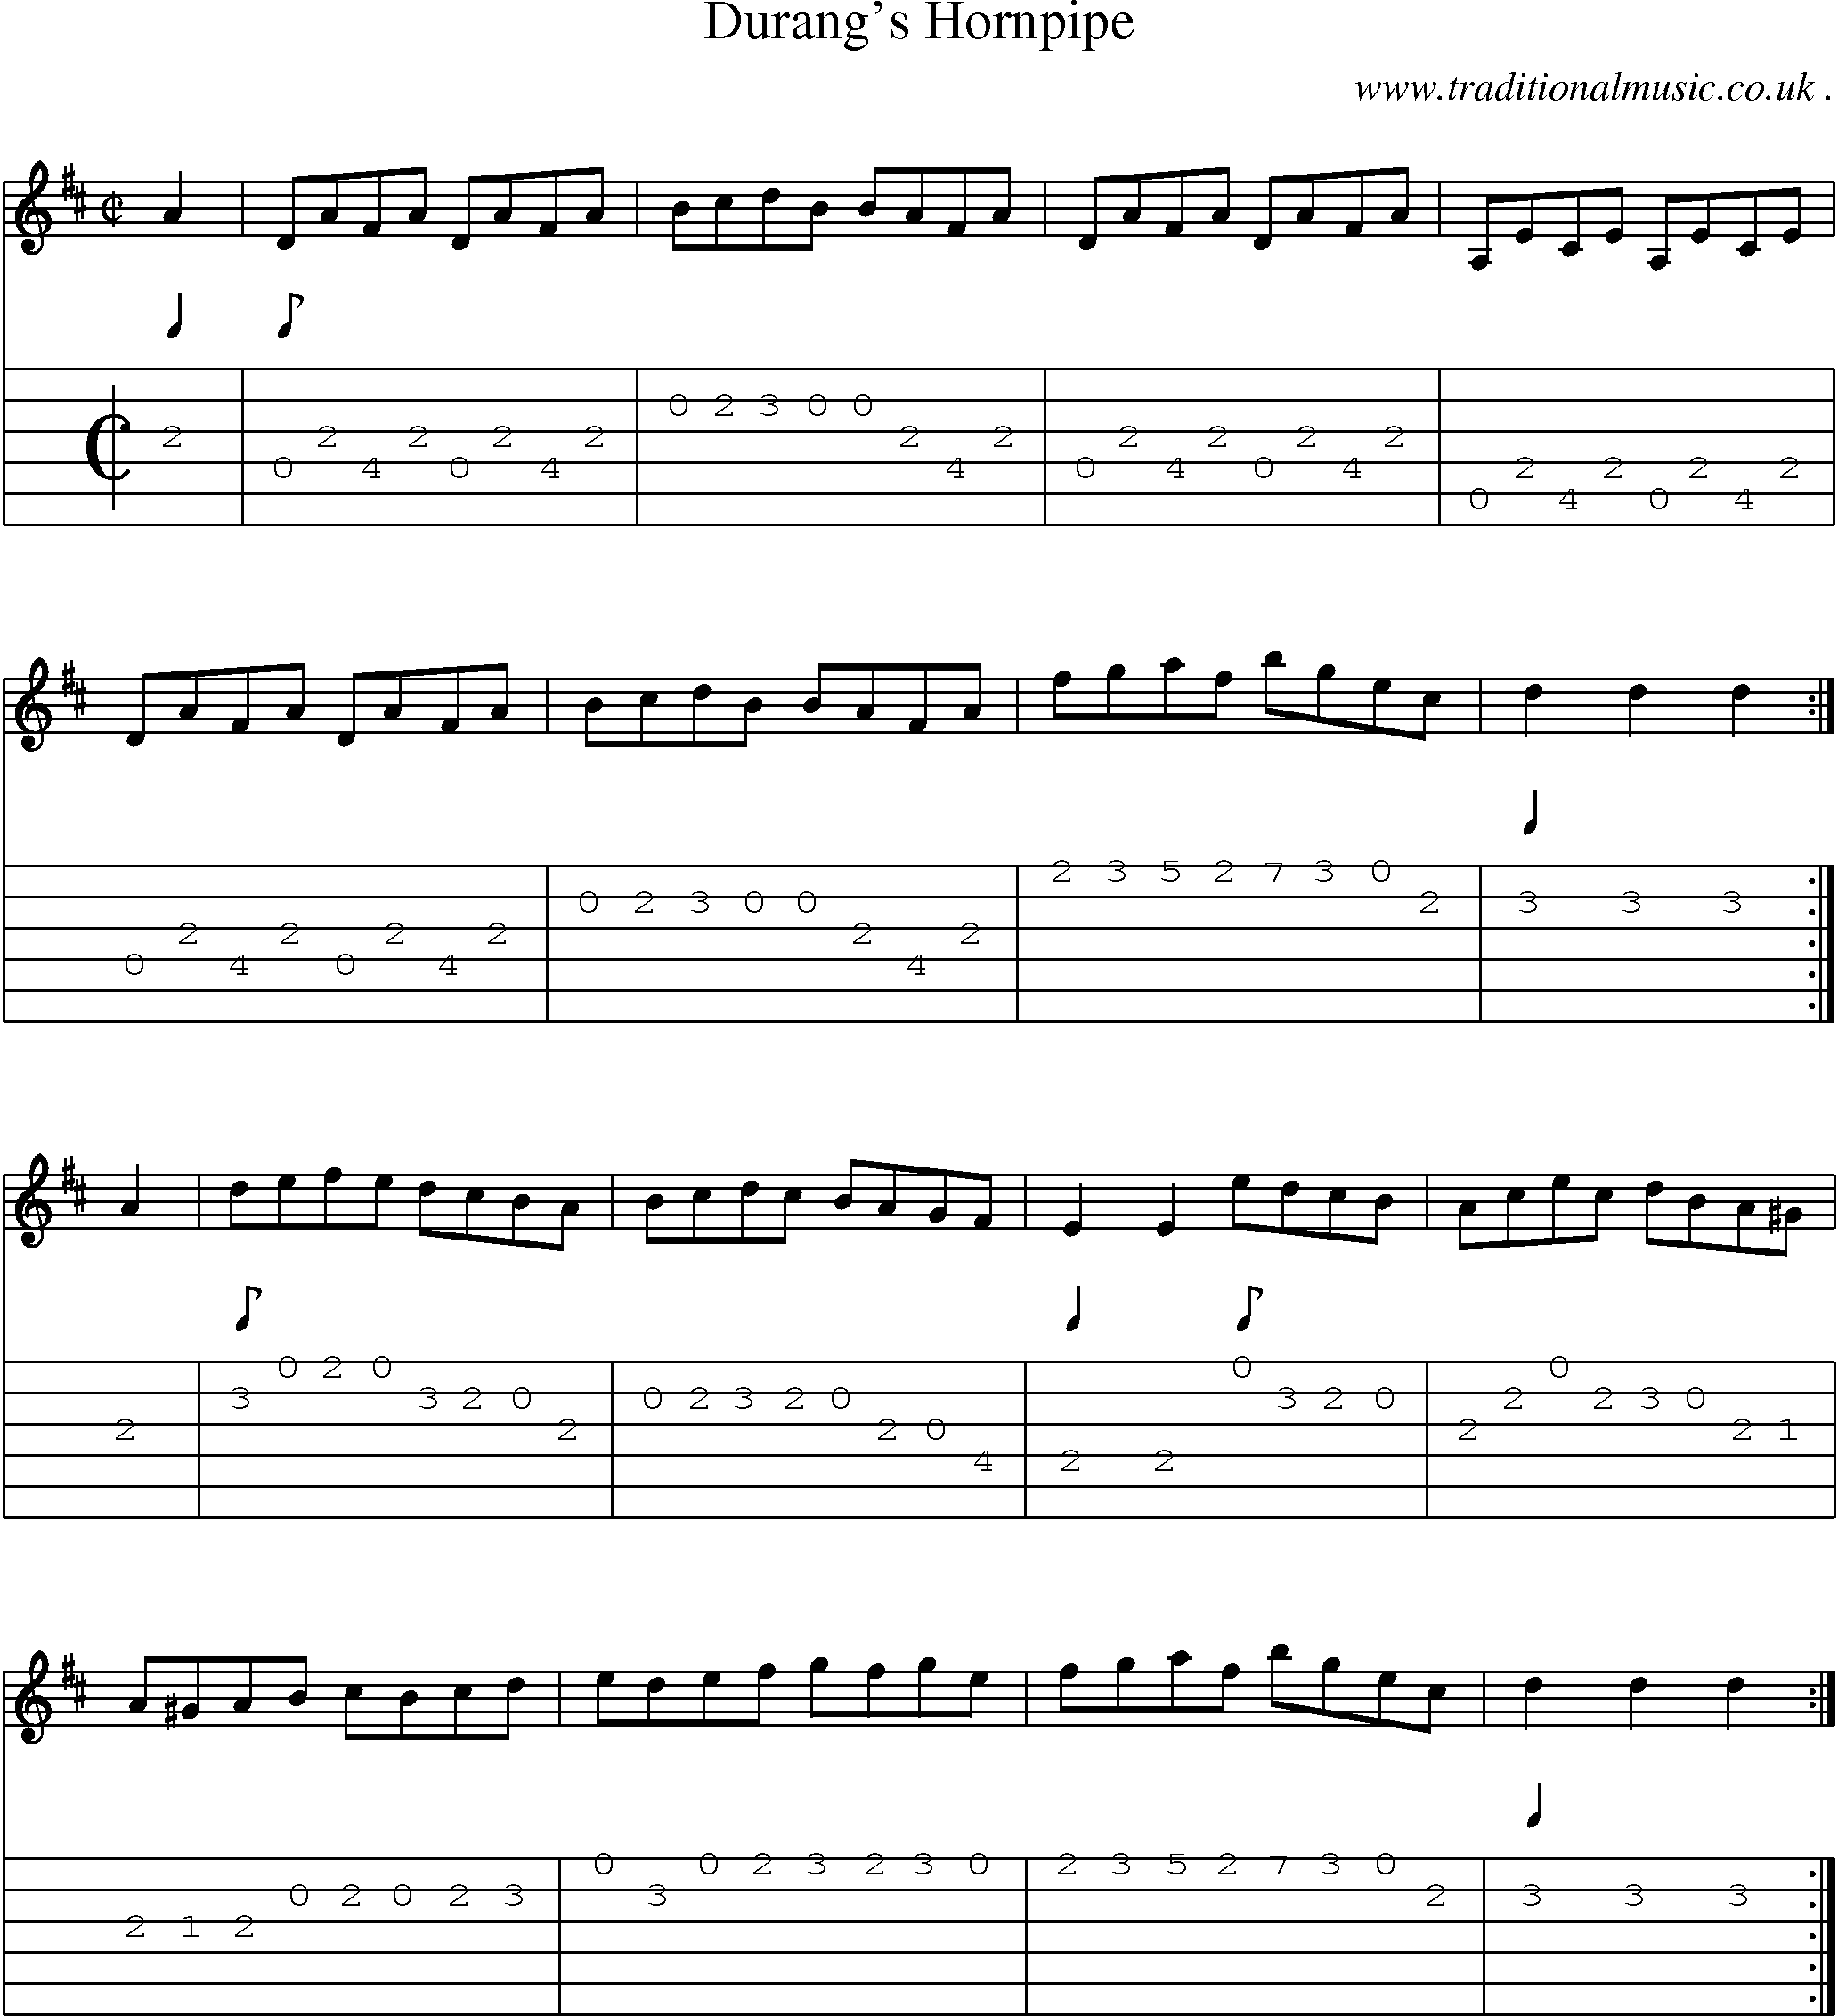 Sheet-Music and Guitar Tabs for Durangs Hornpipe